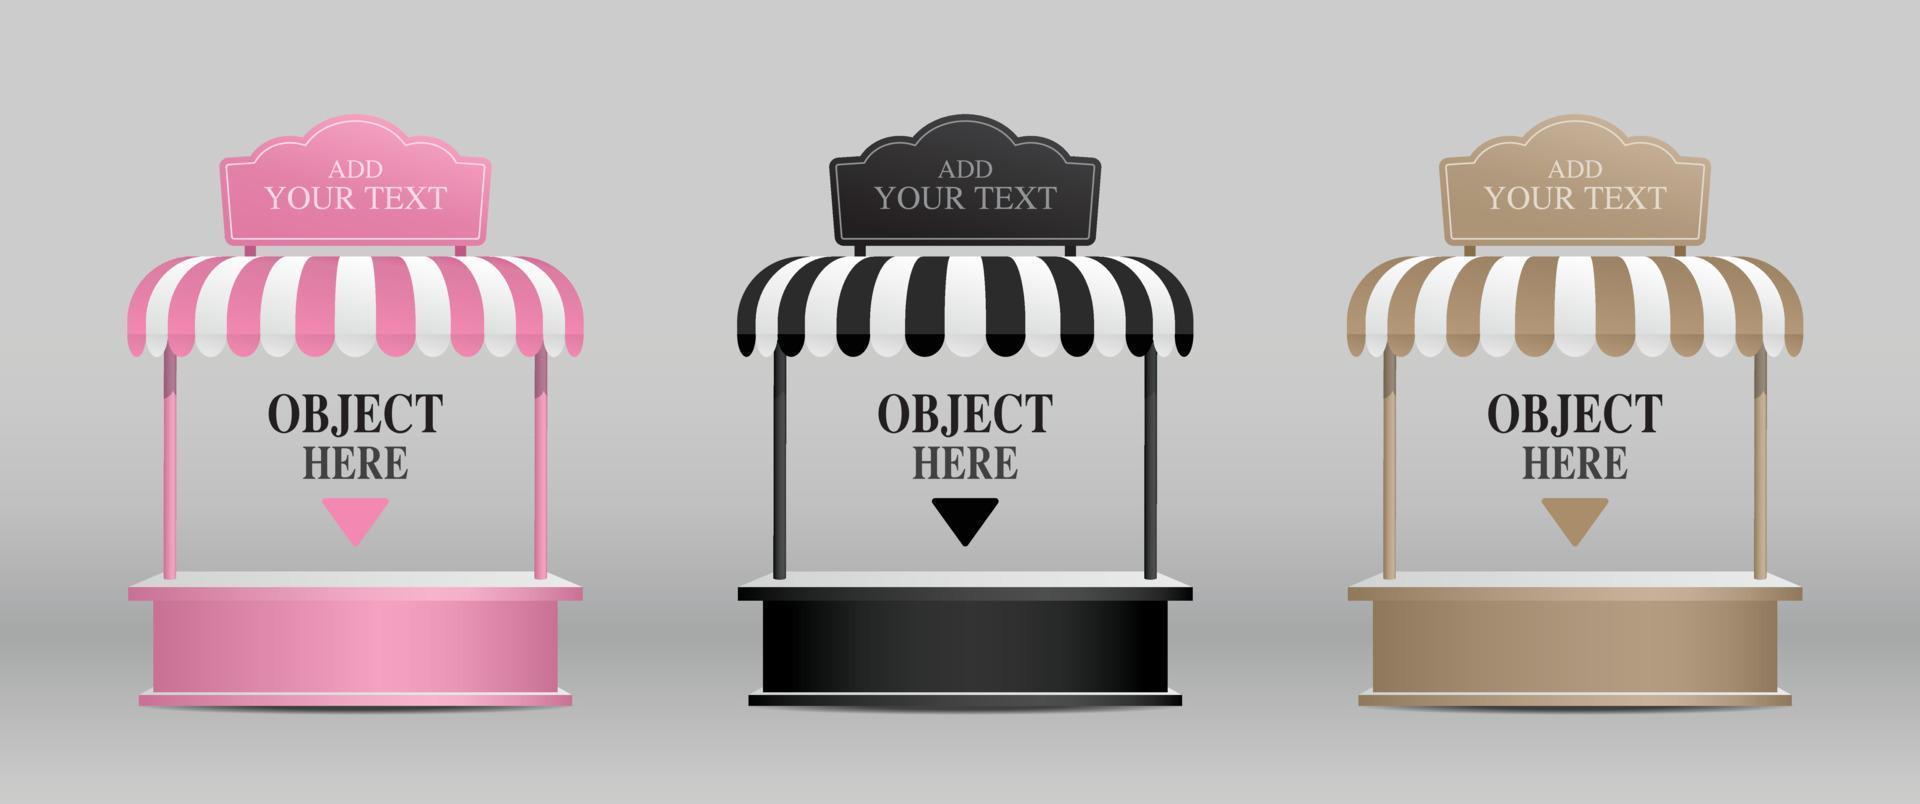 Counter with awning and cute vintage signage 3d illustration vector collection for putting your object.